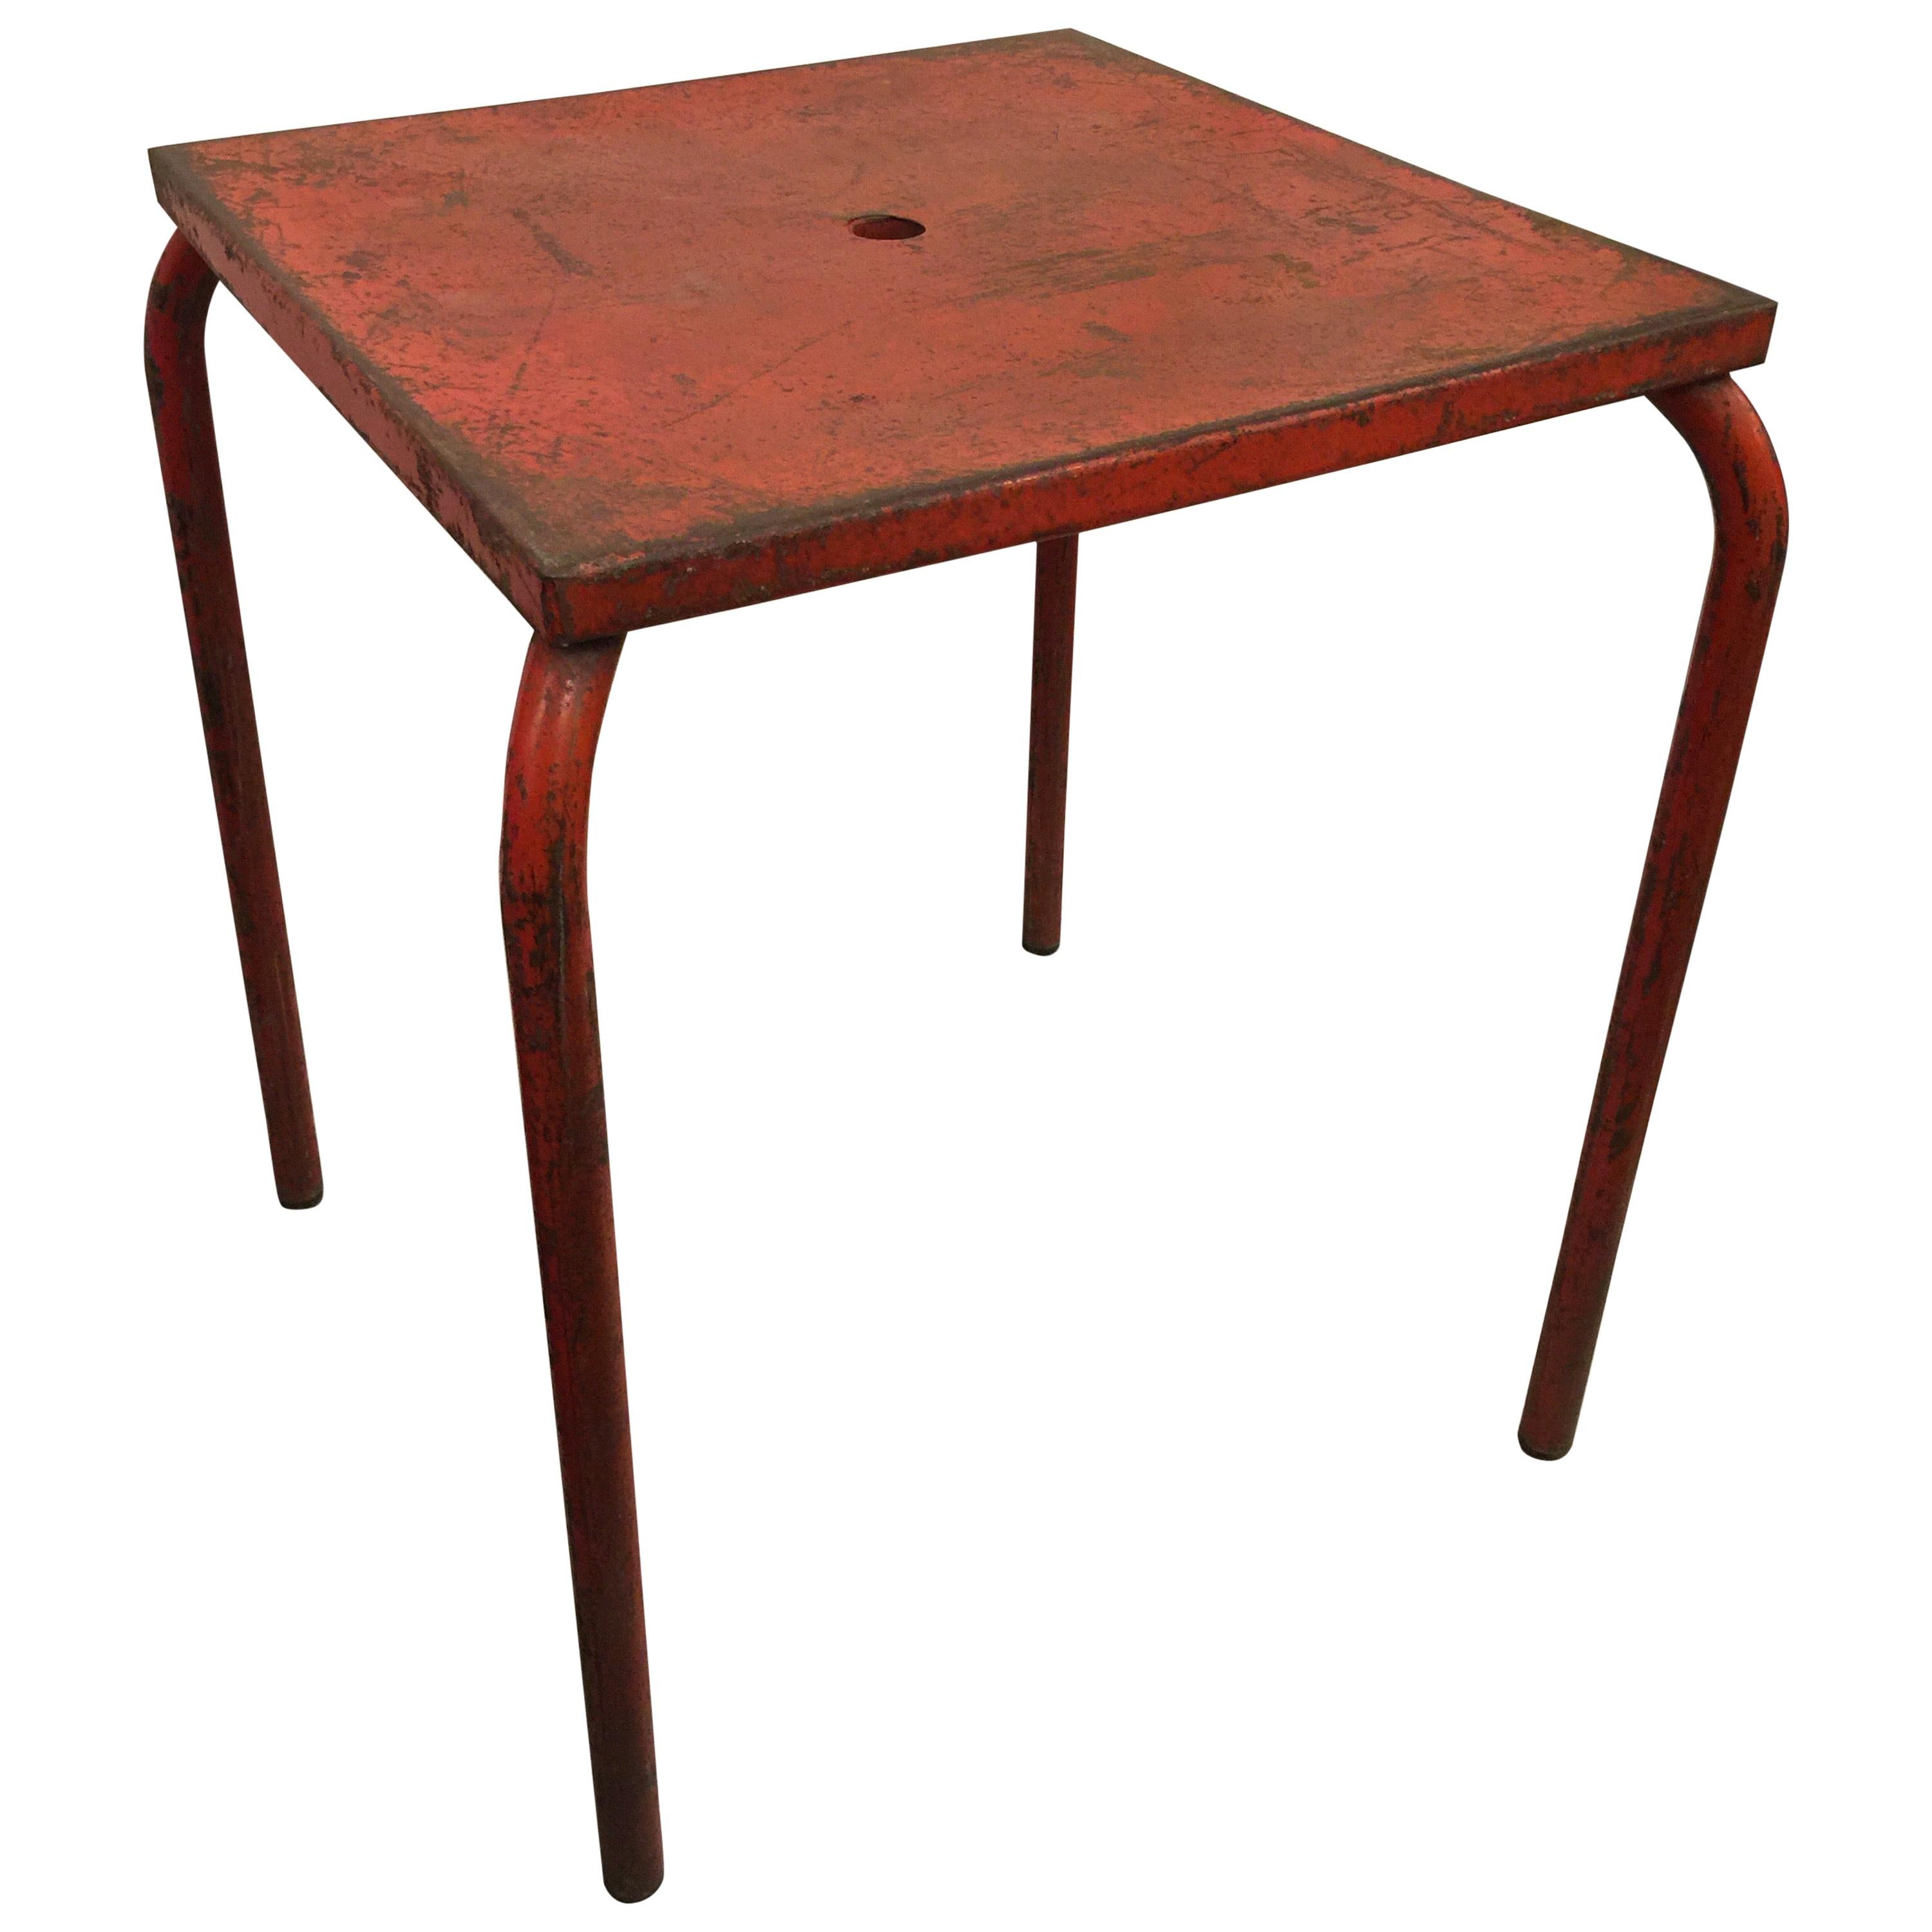 Jean Prouvé Attributed Cafe Metal Table in Original Red